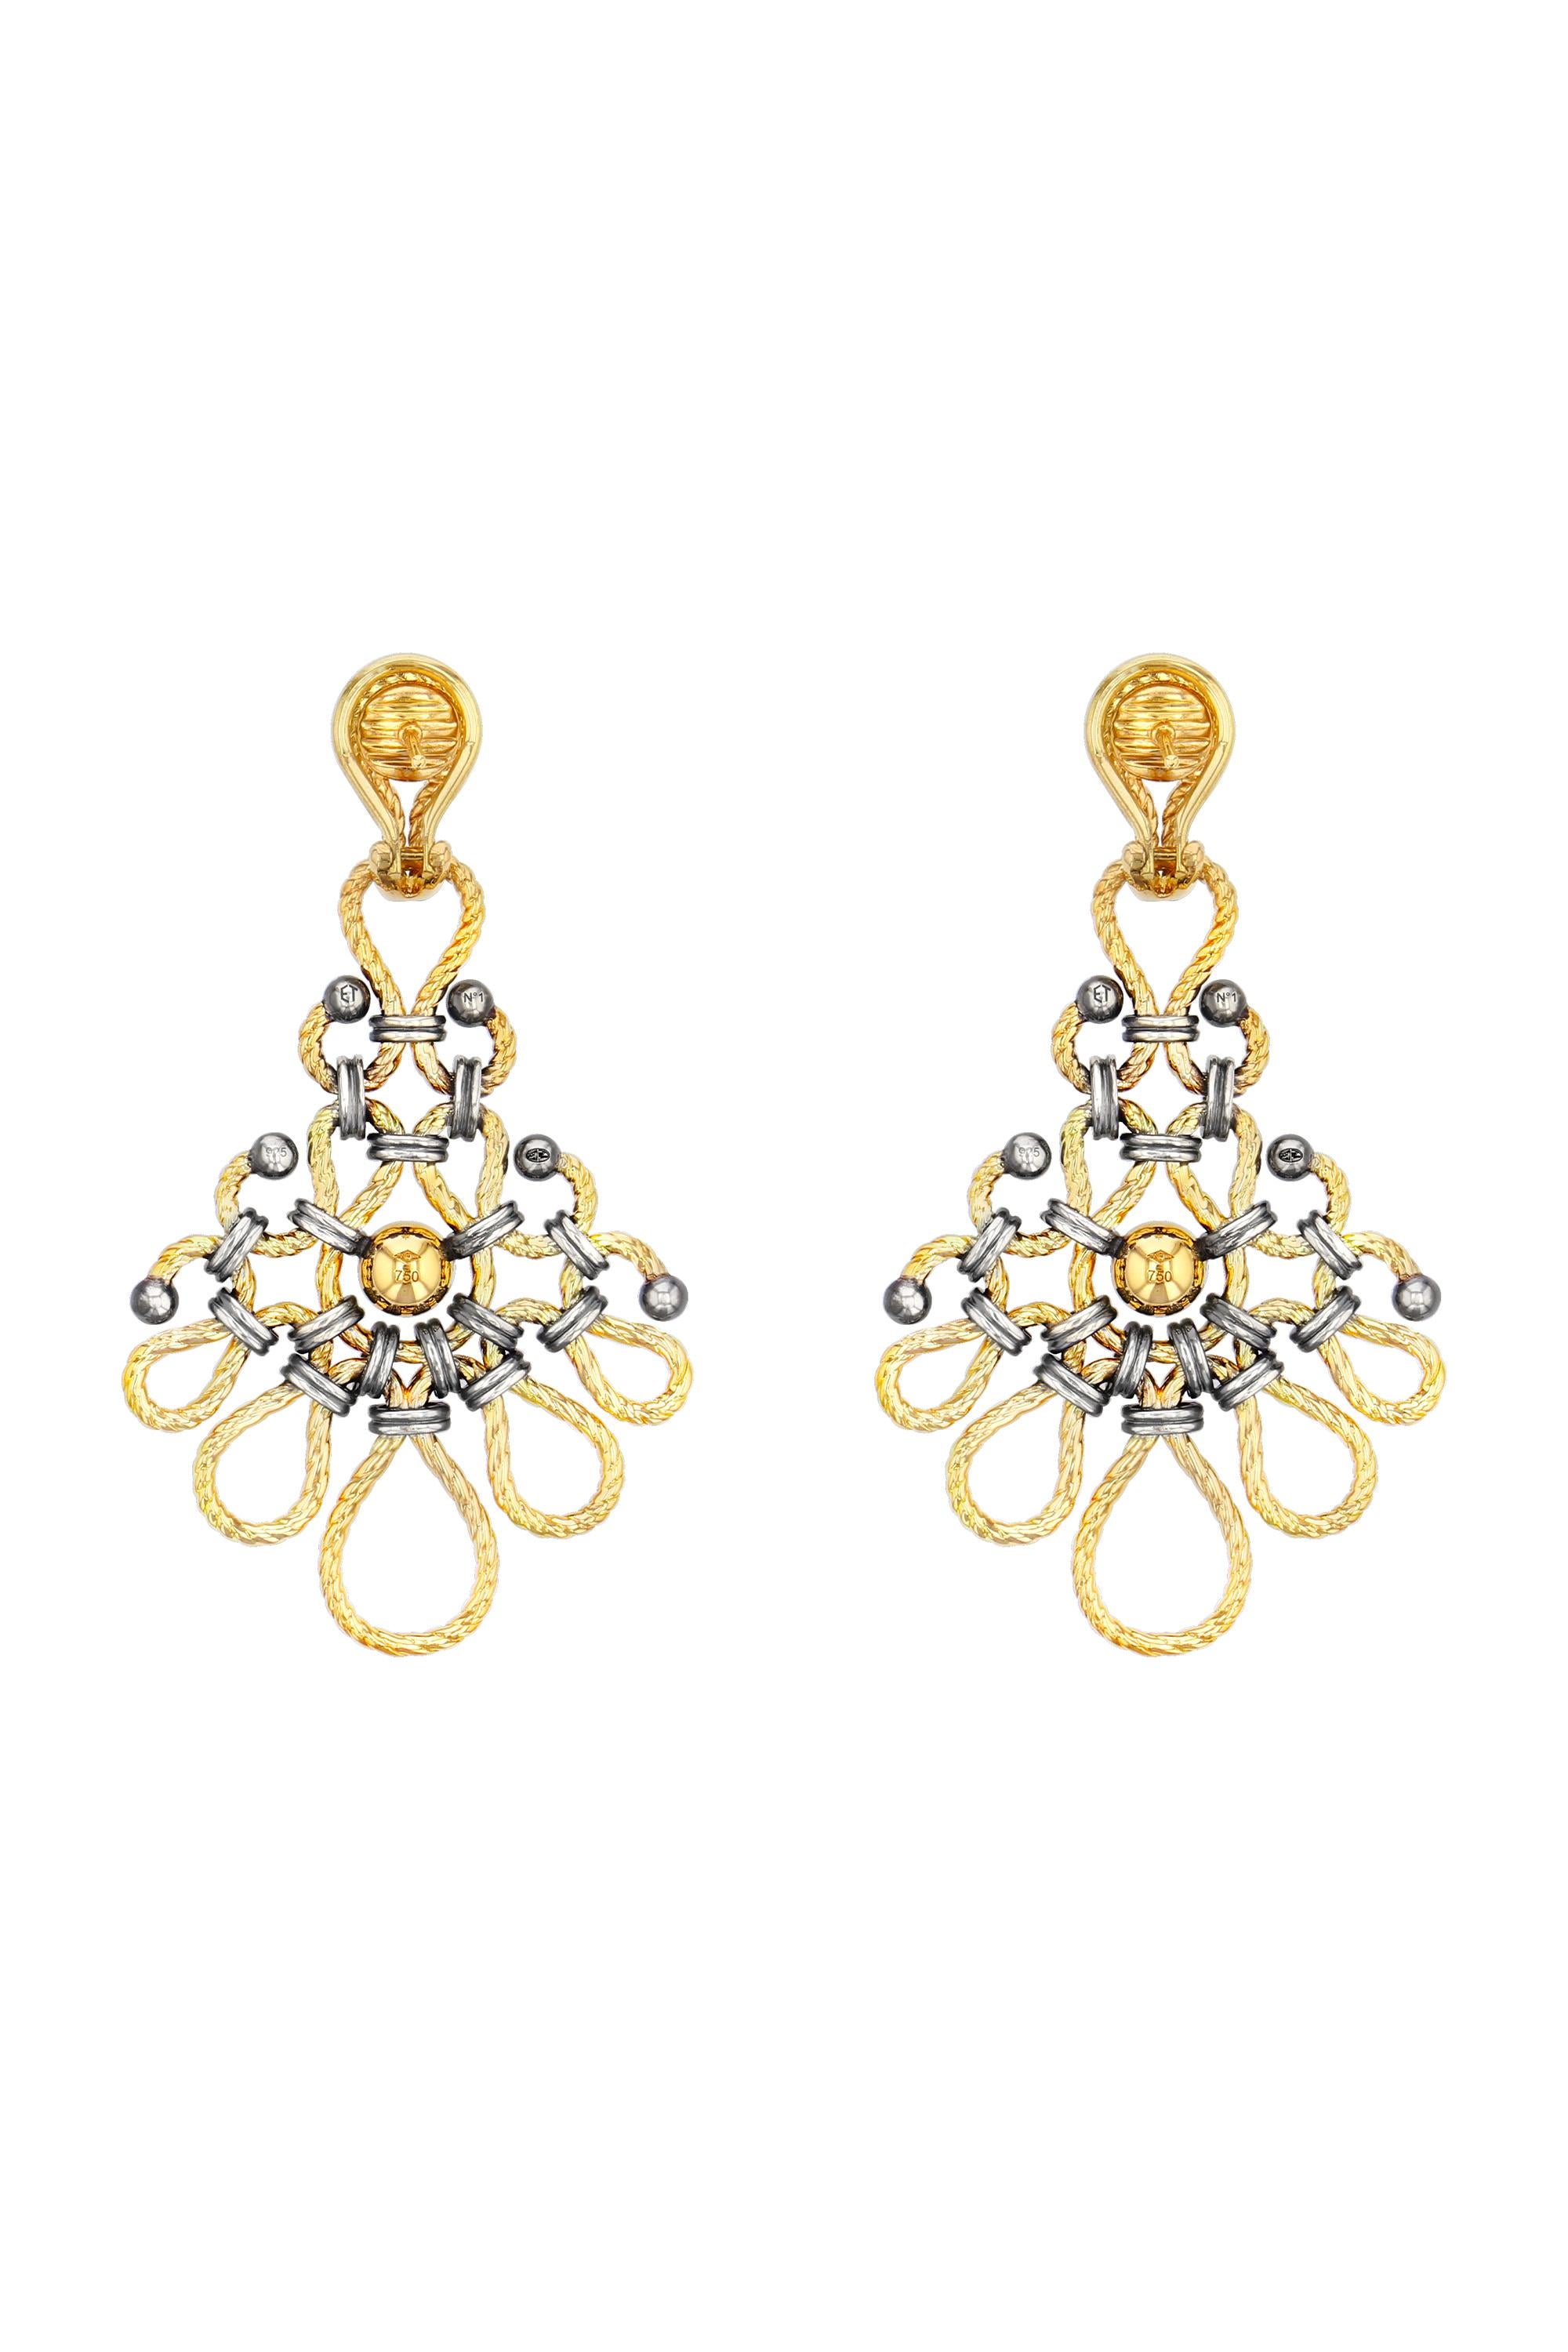 Neoclassical Diamond & Gold Twist Earrings by Elie Top For Sale